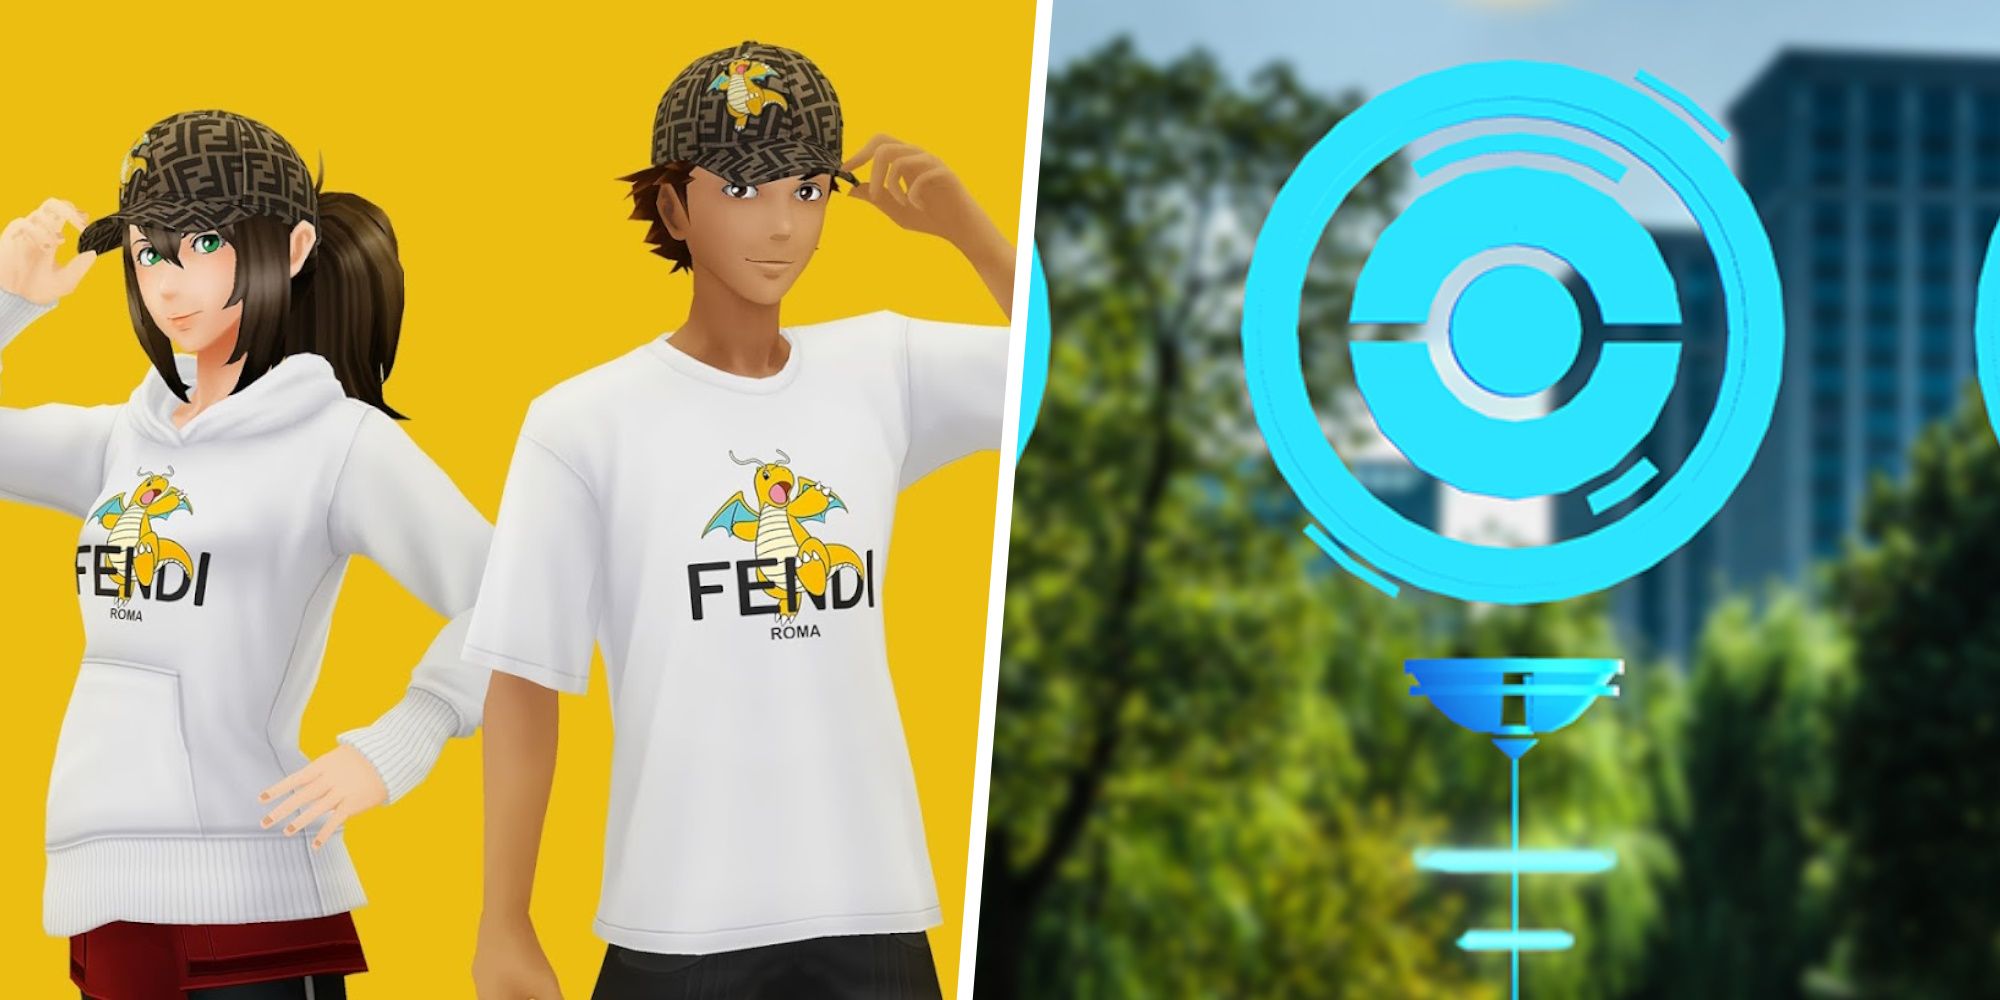 Image of two Pokemon Go avatars in Fendi cosmetics split with an image of a PokeStop